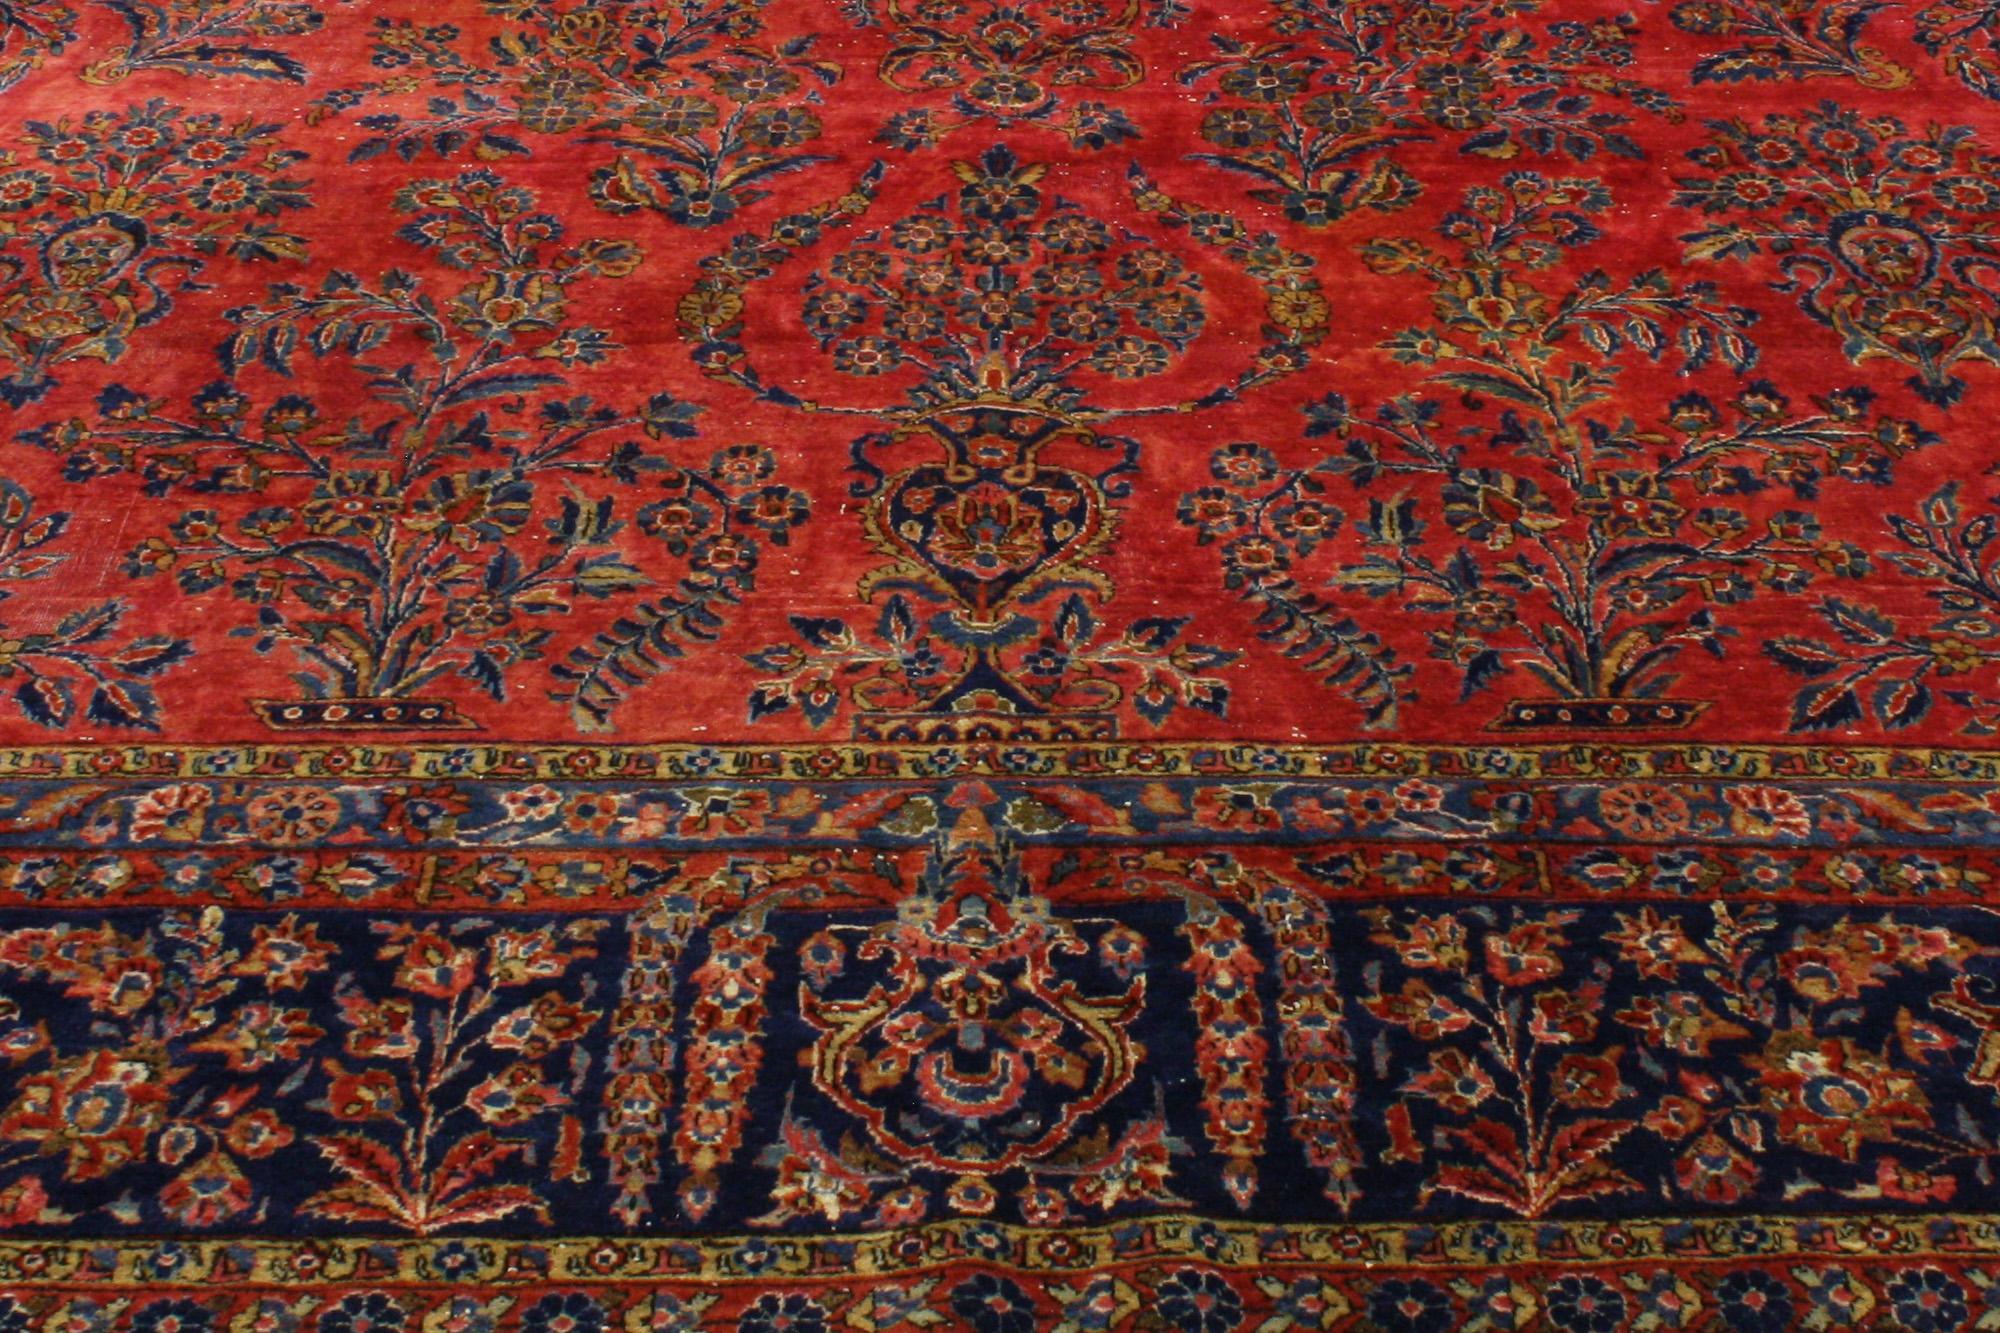 20th Century Antique Persian Kashan Rug with Art Nouveau Style in Rich Jewel Tones